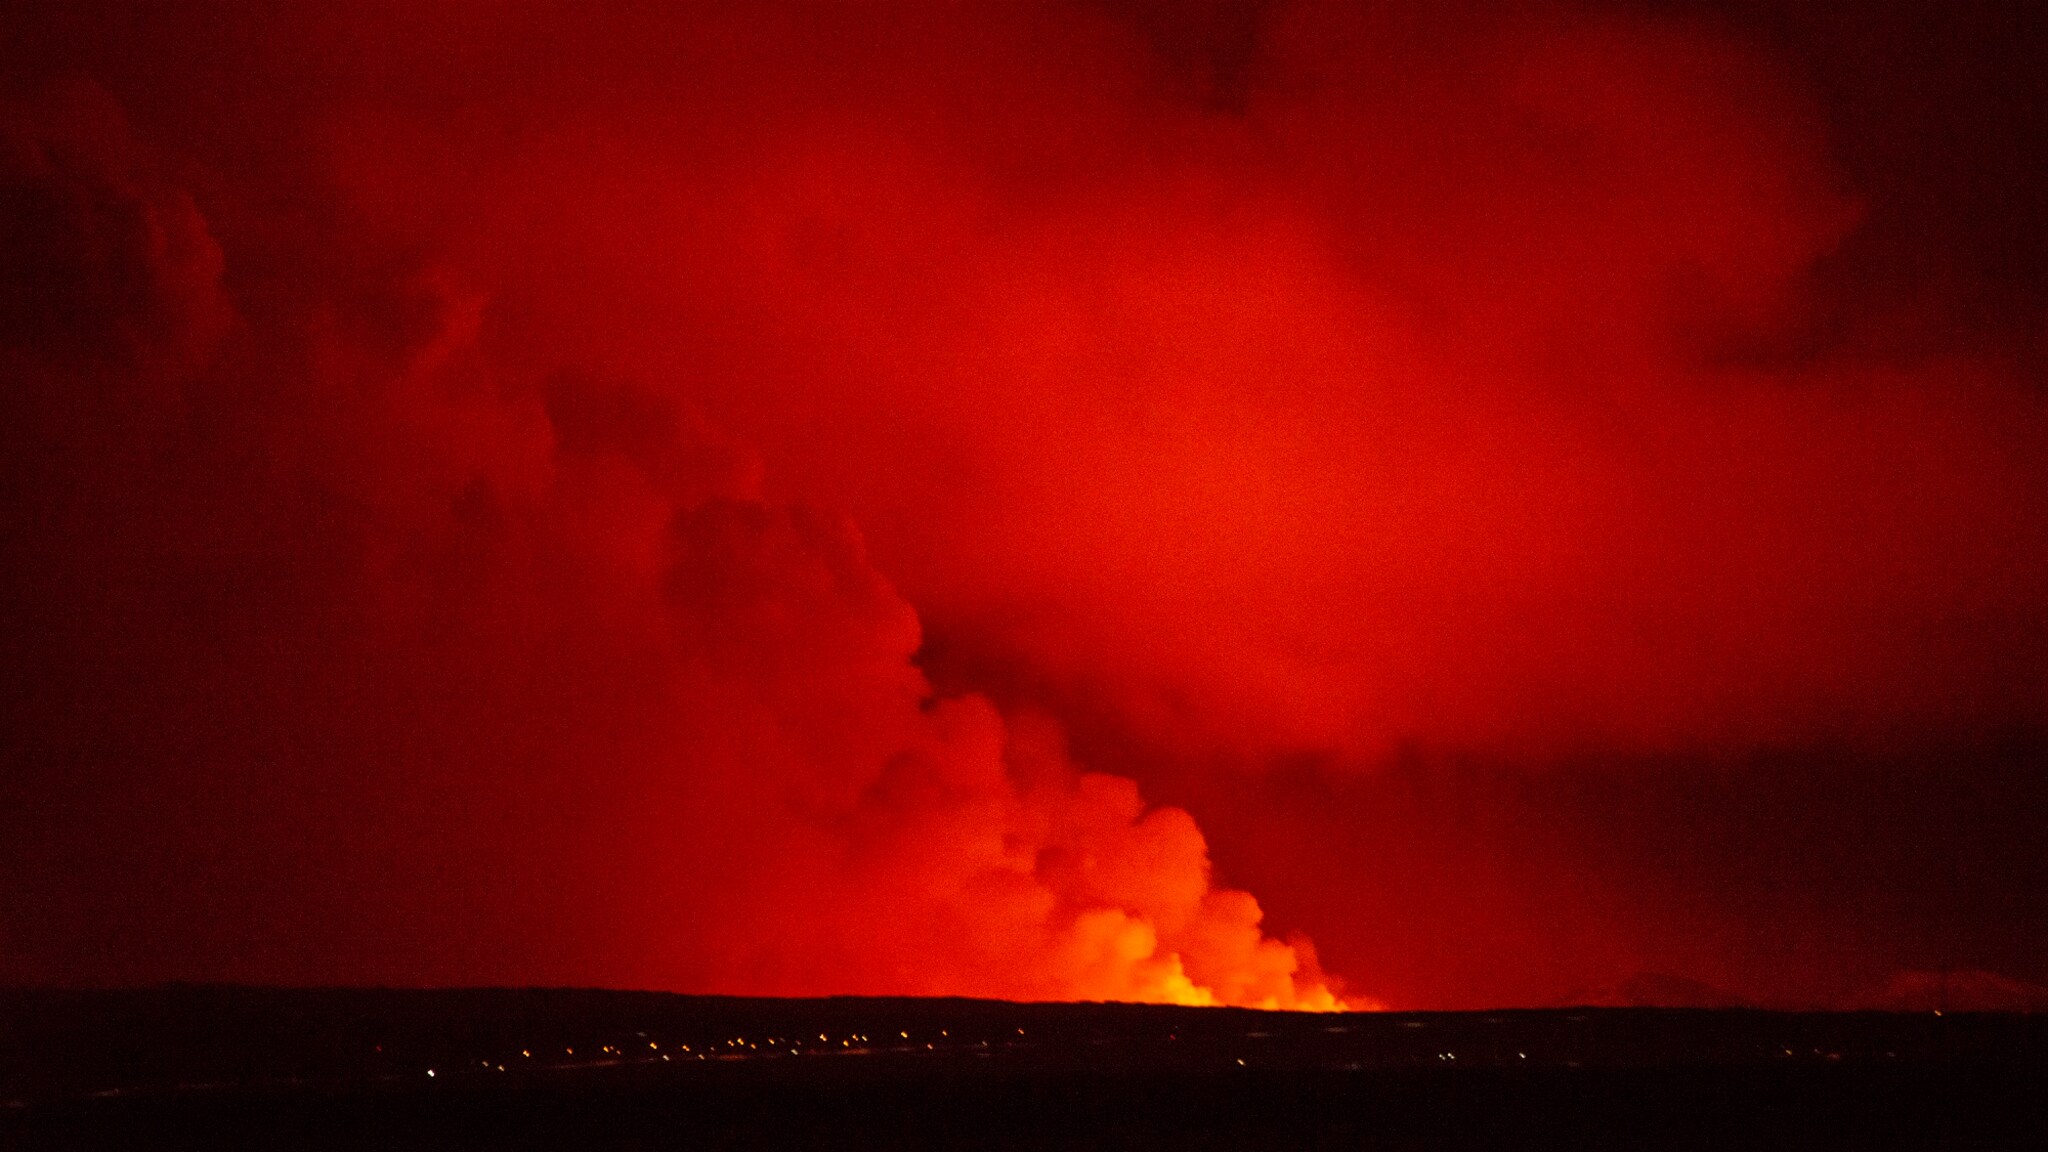 Simone watched the volcanic eruption in Iceland from her window: 'The sky is on fire'